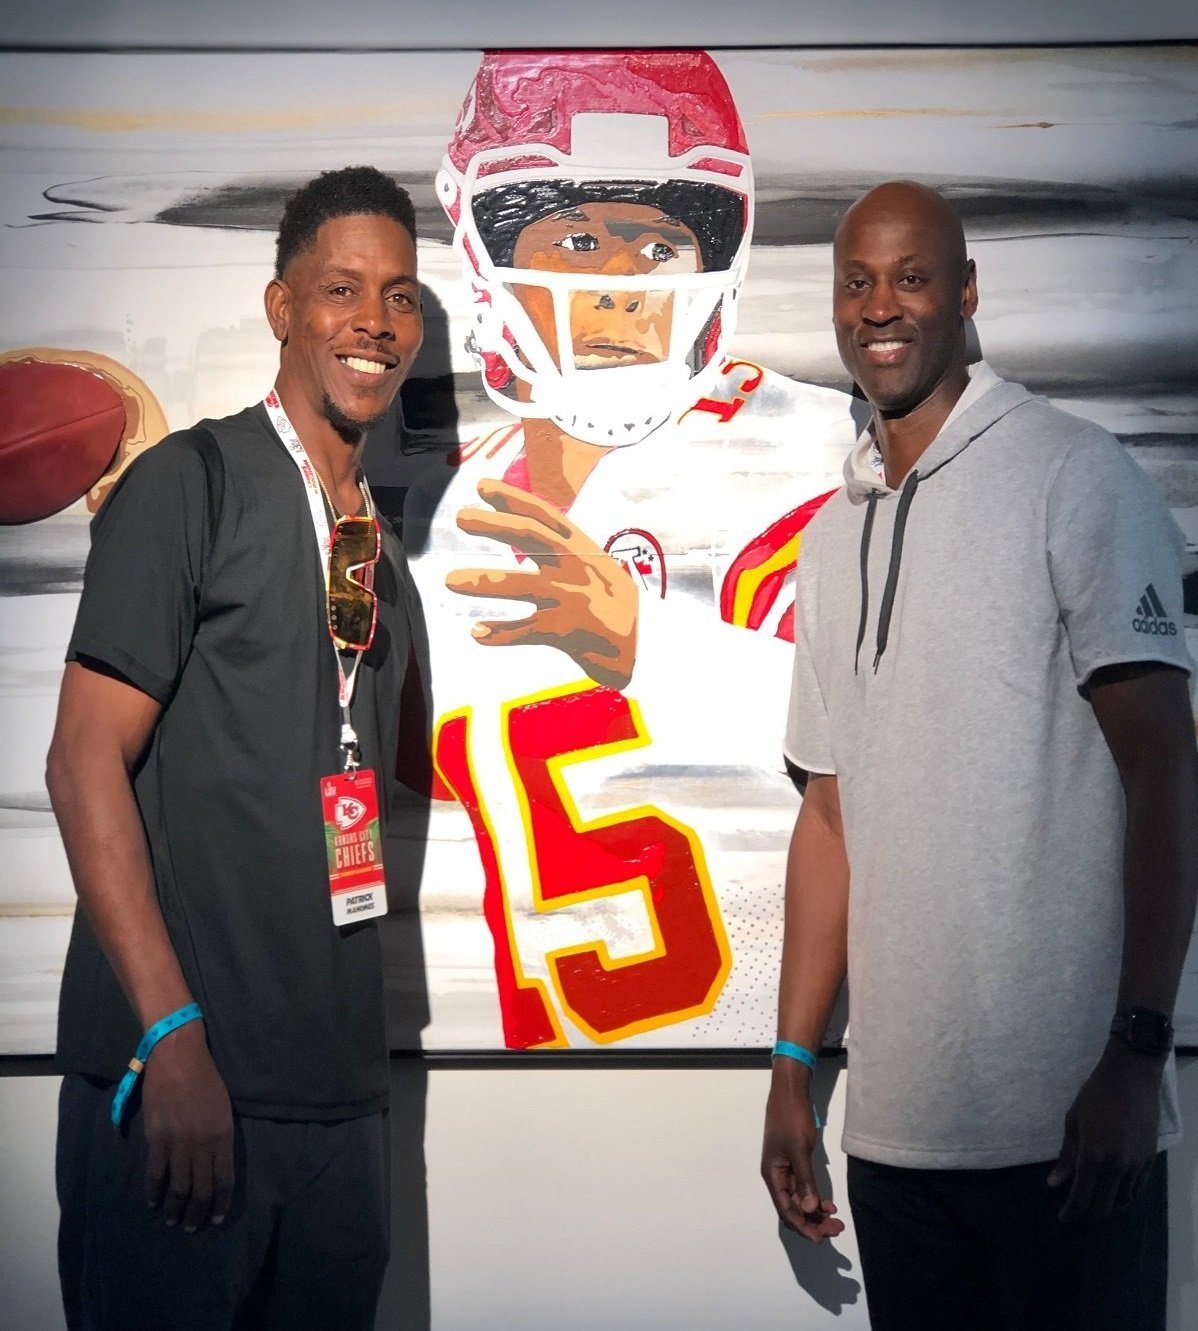 LaTroy Hawkins and Pat Mahomes: A Bond Brought Together Through